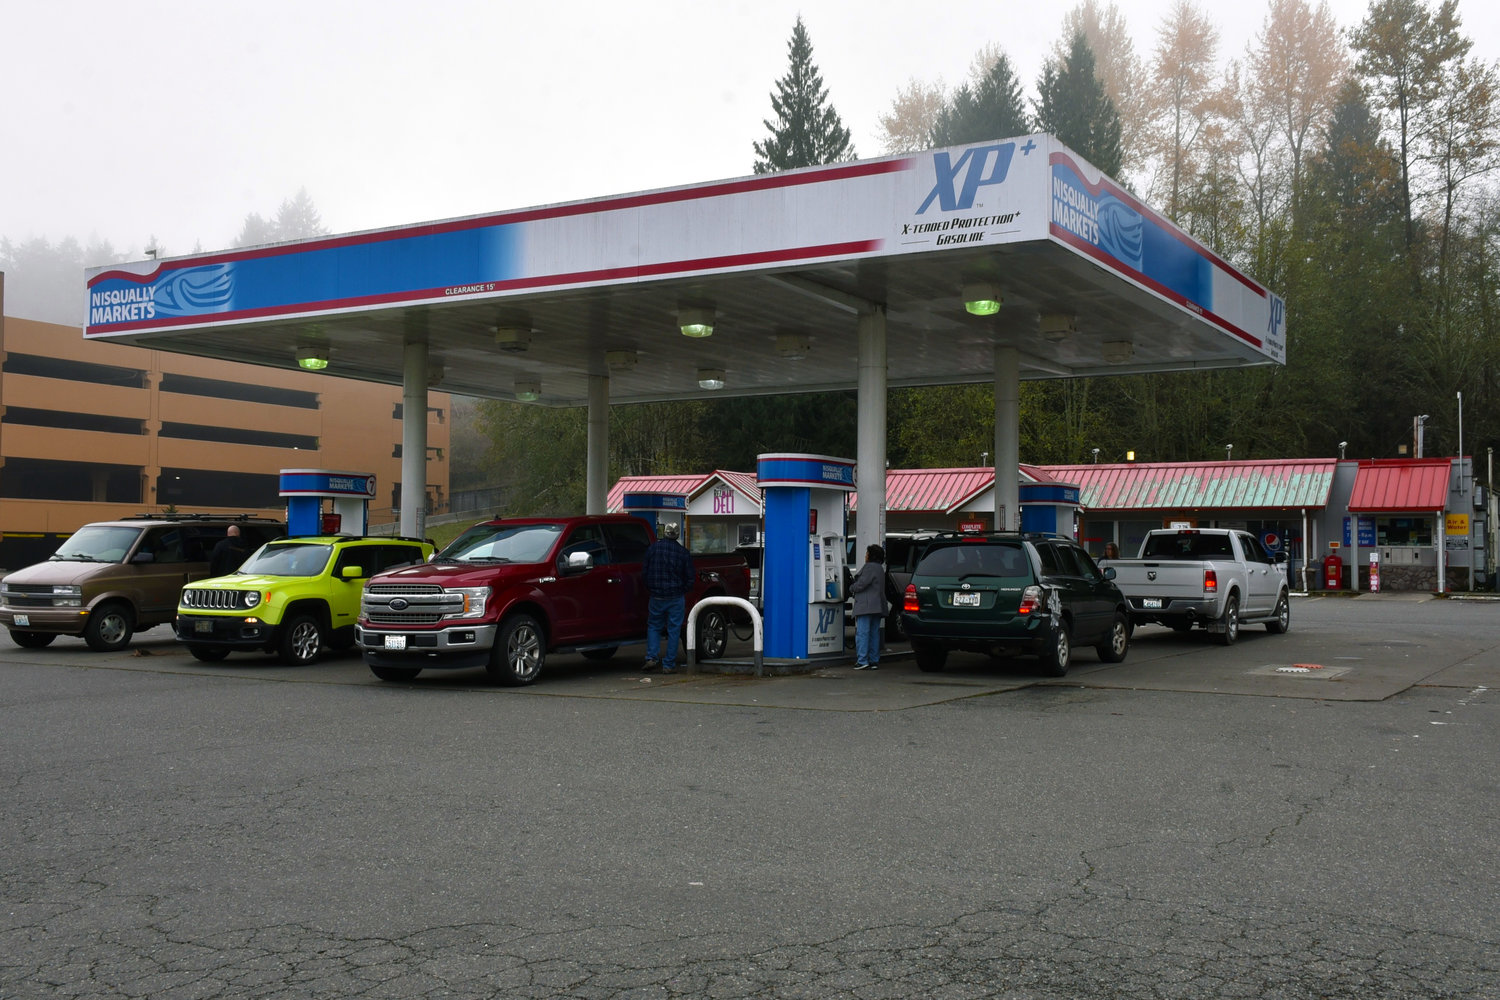 Medicine Creek Enterprises' Rez Mart will get a new location, at the roundabout where Yelm Highway and state Route 510 meet.